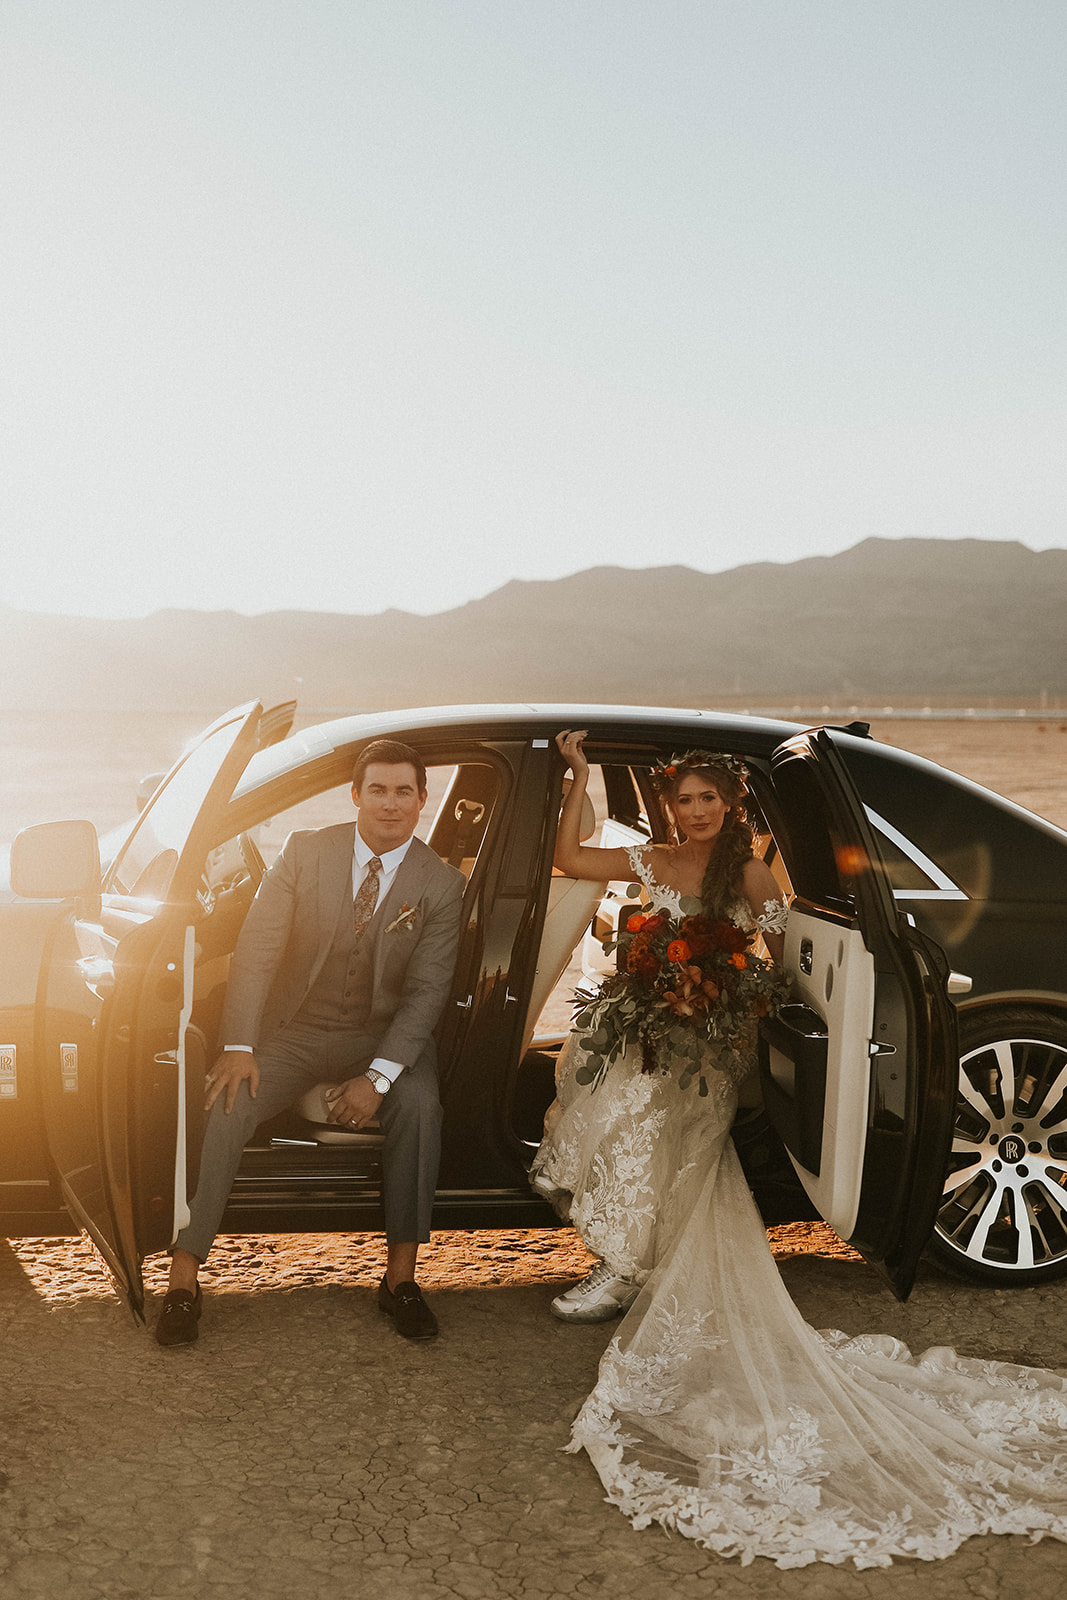 All Doors Open of Rolls Royce While Groom is in Front Seat & Bride is in the back during Dry Lake Bed Fall Inspired Elopement in Las Vegas 